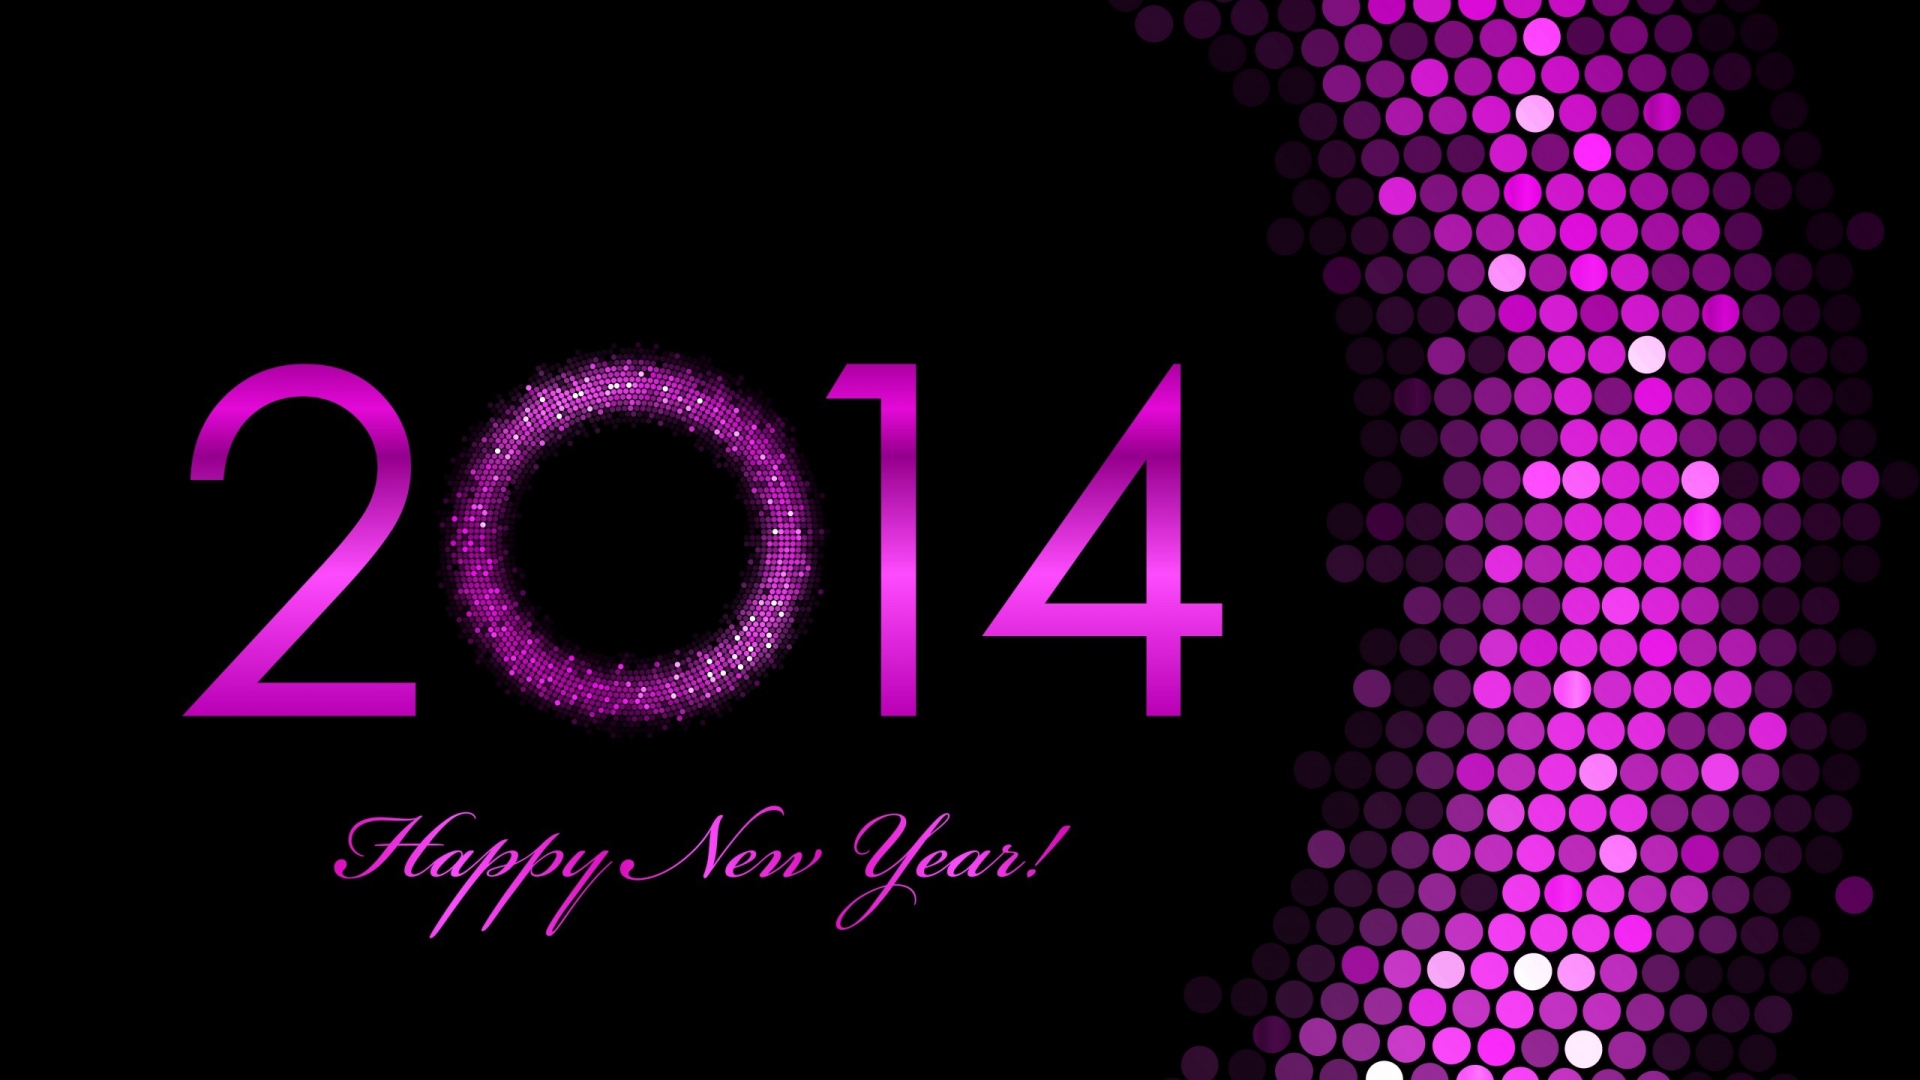 2014 Happy New Year for 1920 x 1080 HDTV 1080p resolution